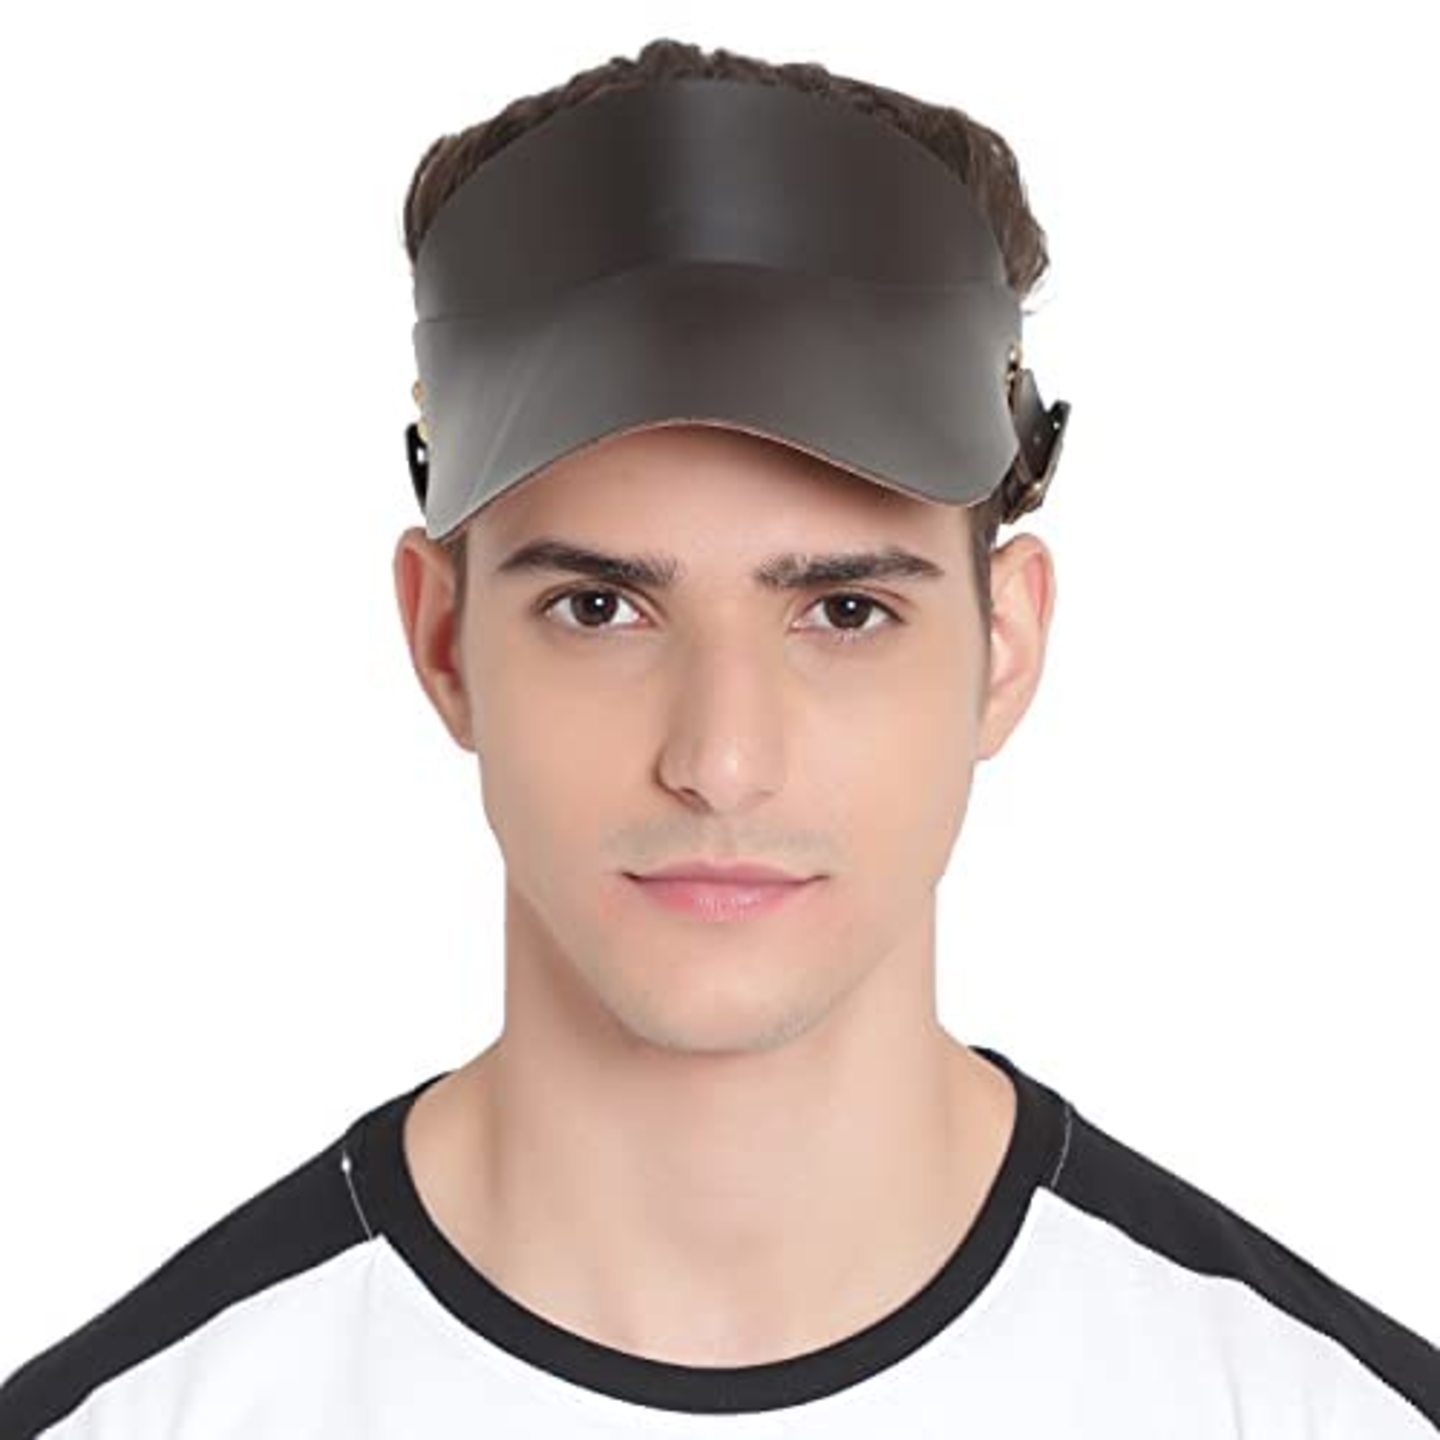 Panashe Isola Leather Visor Cap Brown perfect for the beach, for urban walks, or for sports like golf, tennis,outdoors, travelling etc it will protect you from the suns rays. Brown